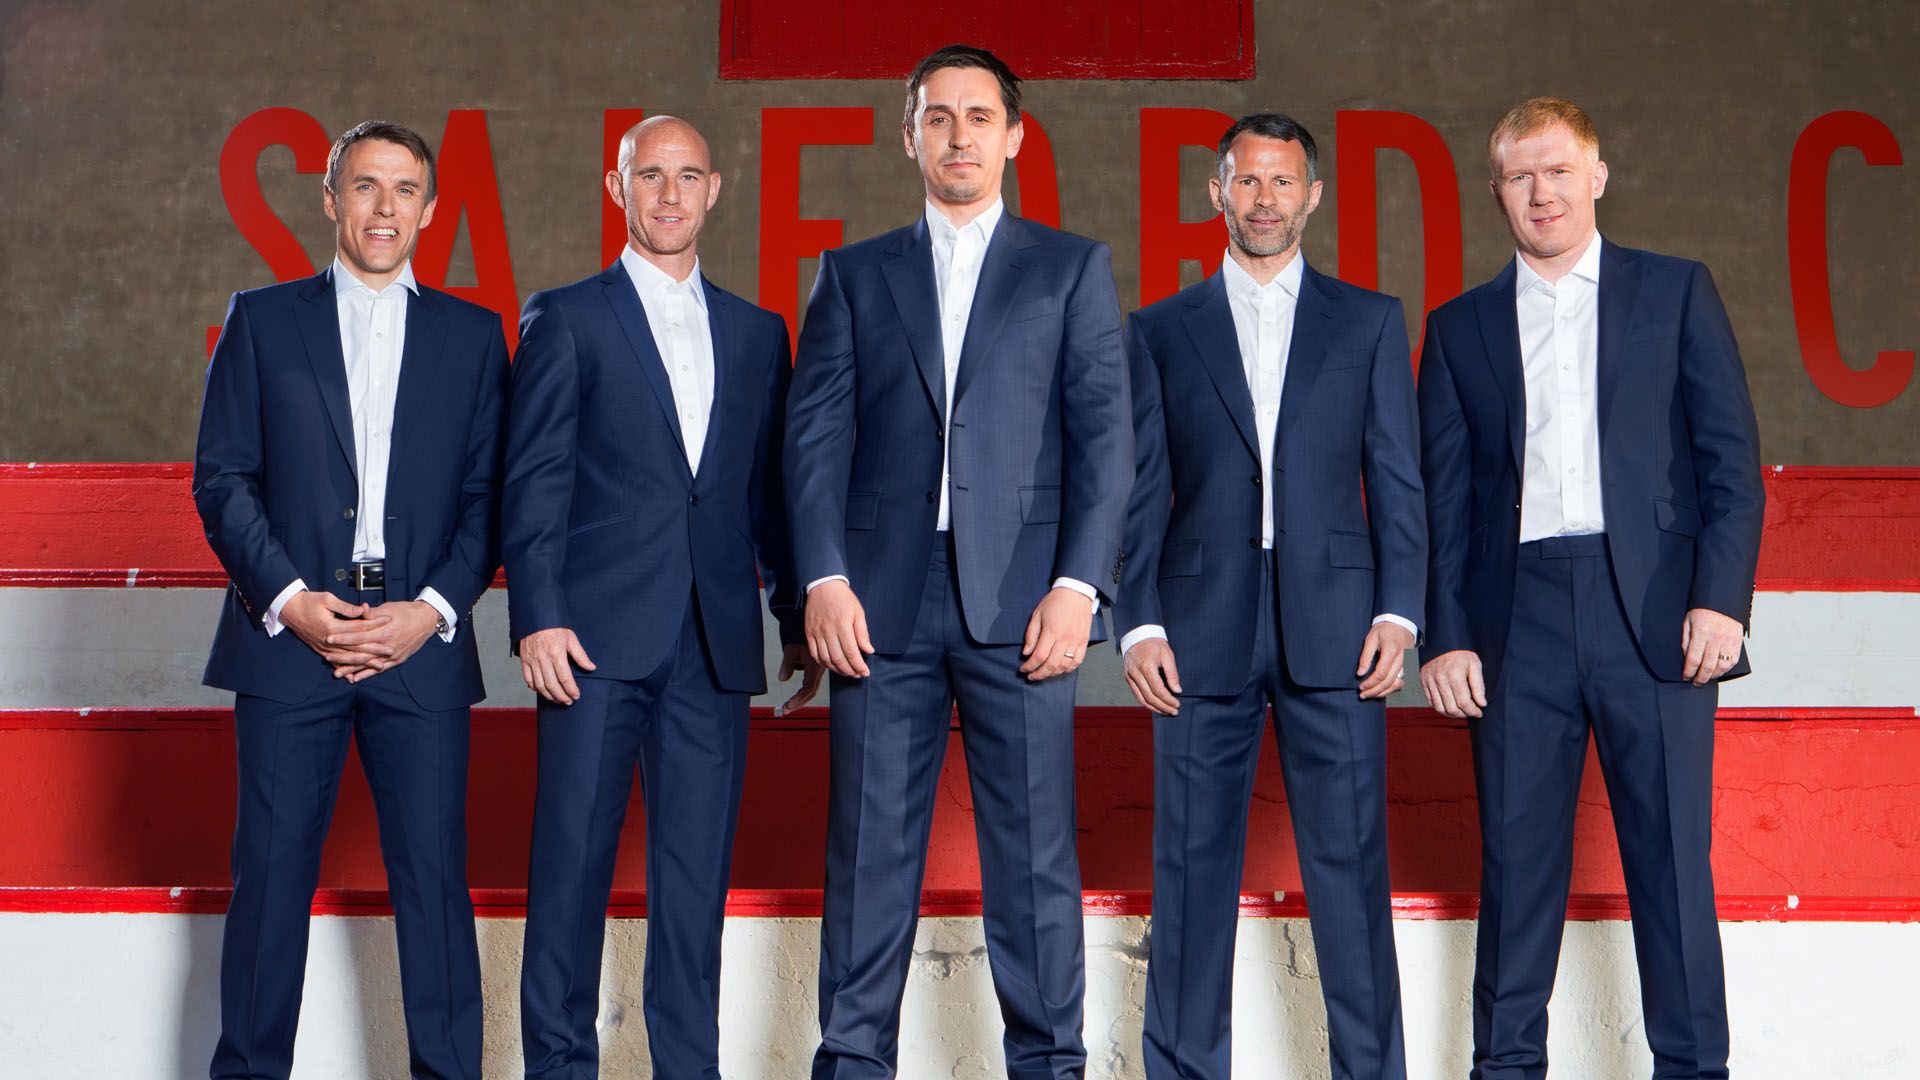 Class of '92: Out of Their League background